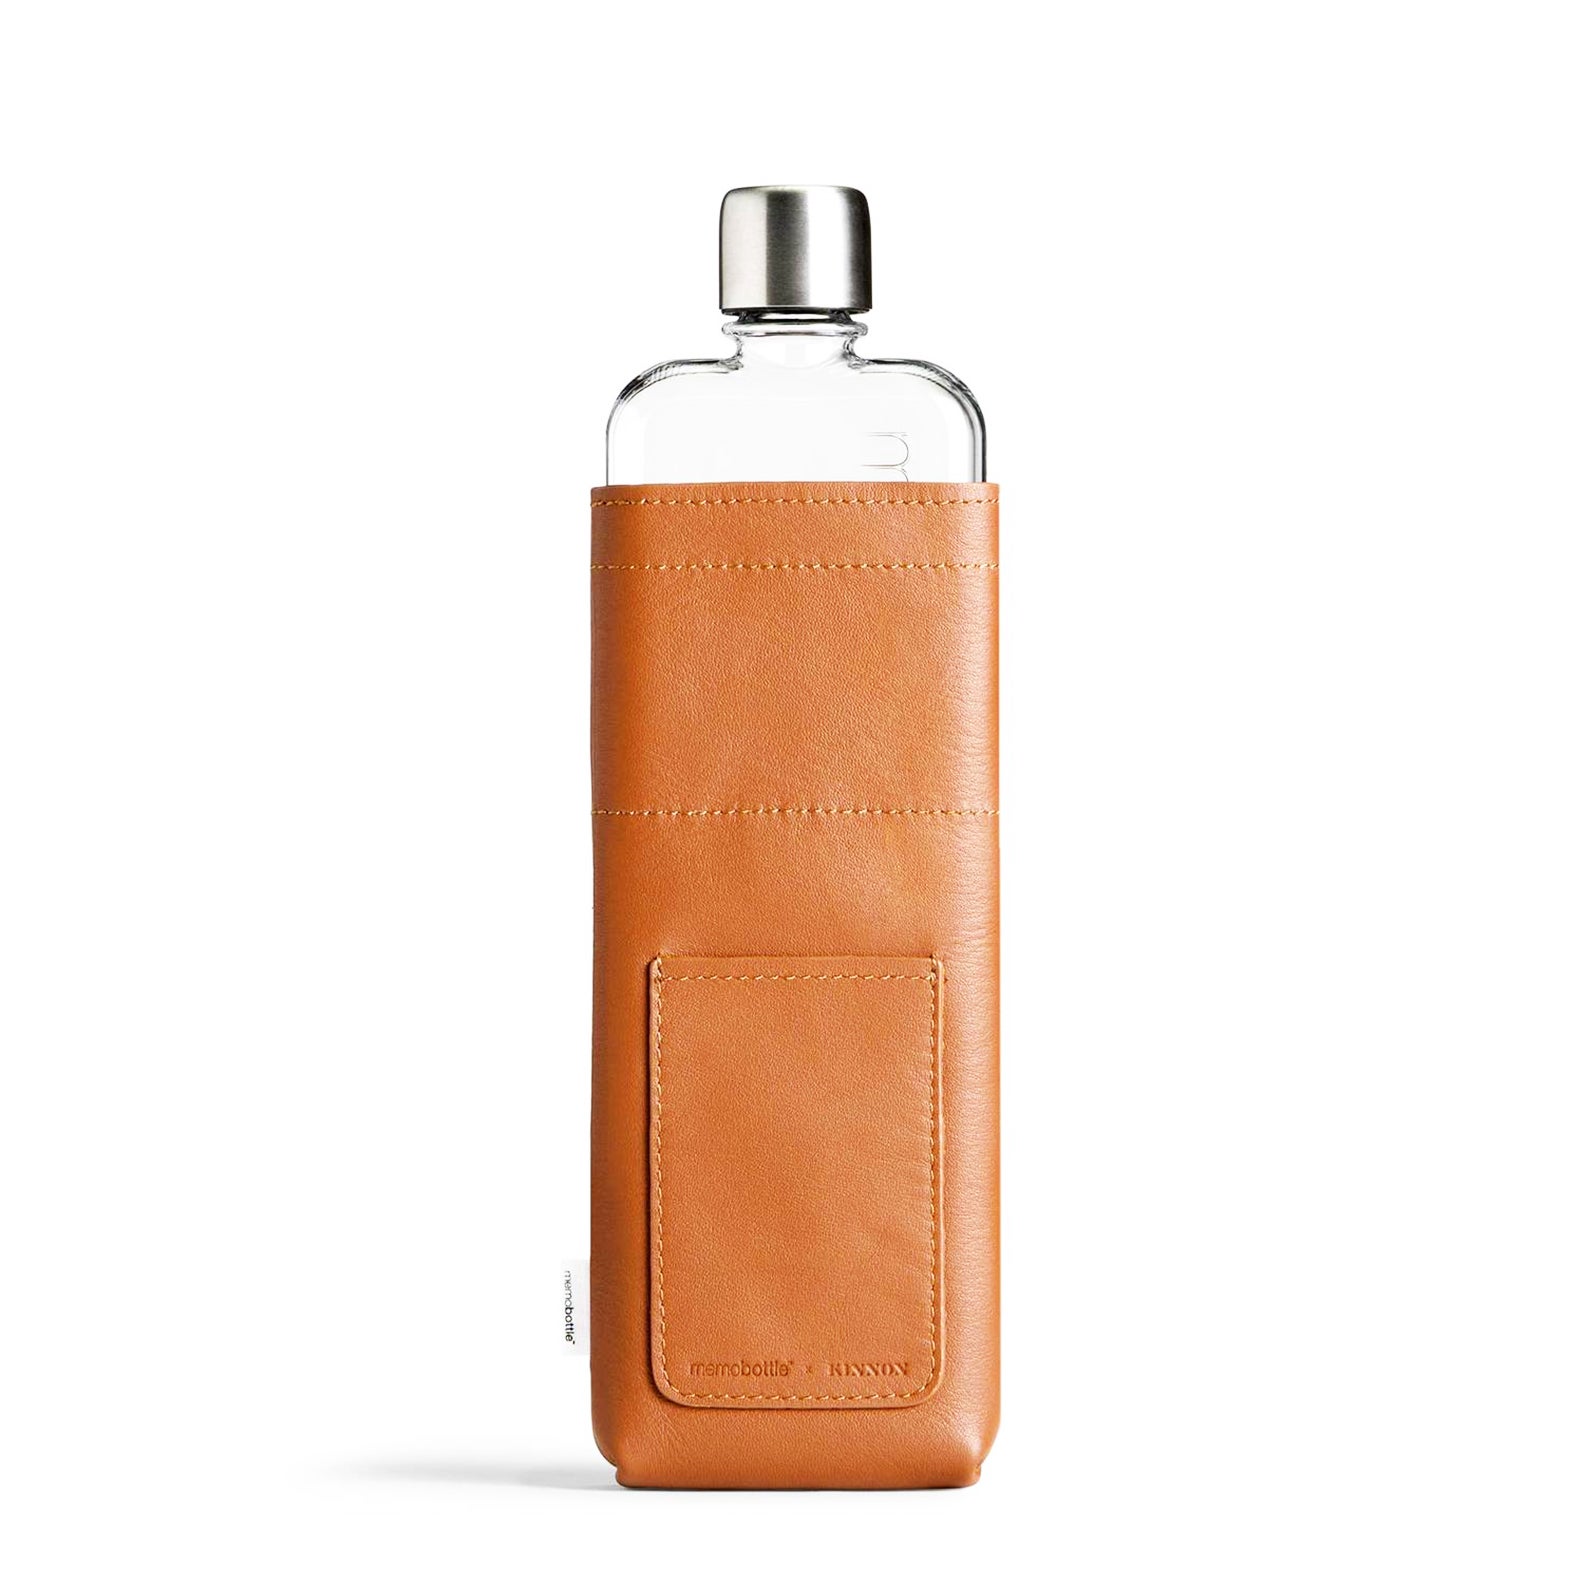 https://assets.bigcartel.com/product_images/266887727/n4BRnxjTo2jsKCyQh1ox_SLIM_LEATHER_MEMOBOTTLE_TAN_DUO_1500x1500+_1_.jpg?auto=format&fit=ma...